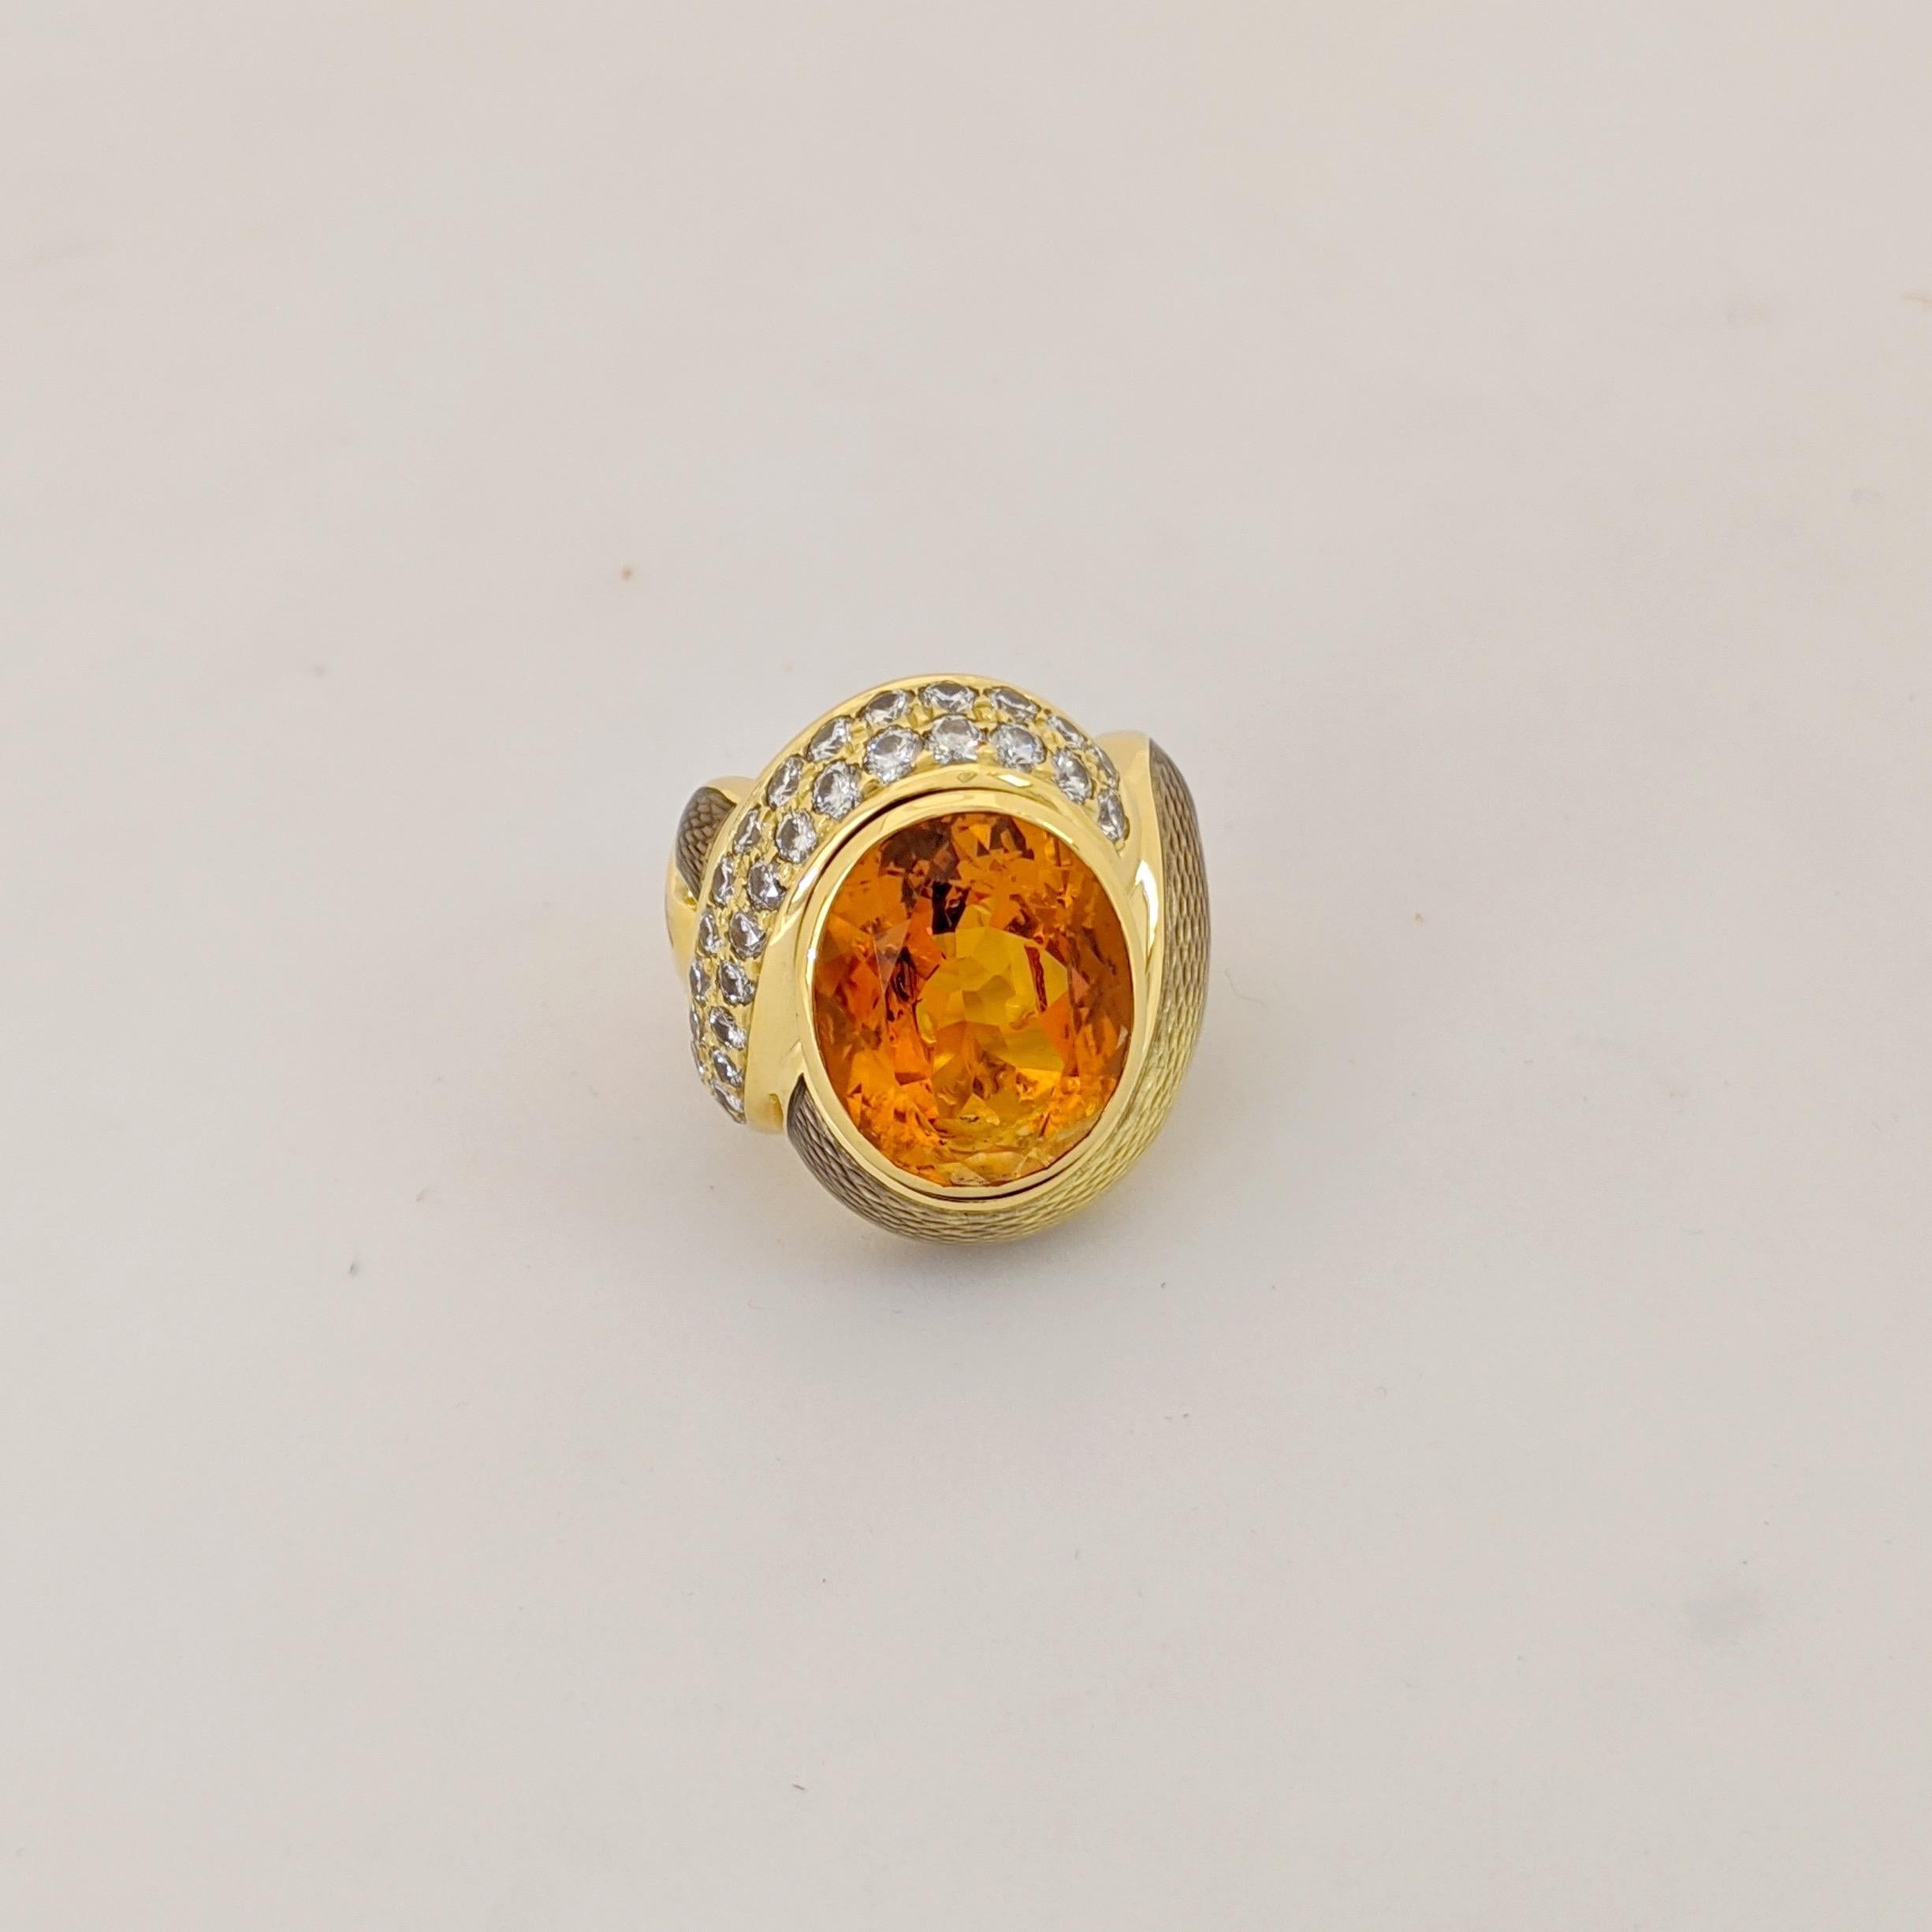 Started in 1967 by Leo and Ginnie de Vroomen the company is known for bold and innovative designs. Distinctive from the start, the renowned company is simply known as de Vroomen.
This  18 karat yellow gold ring is designed using guicholle enamel in